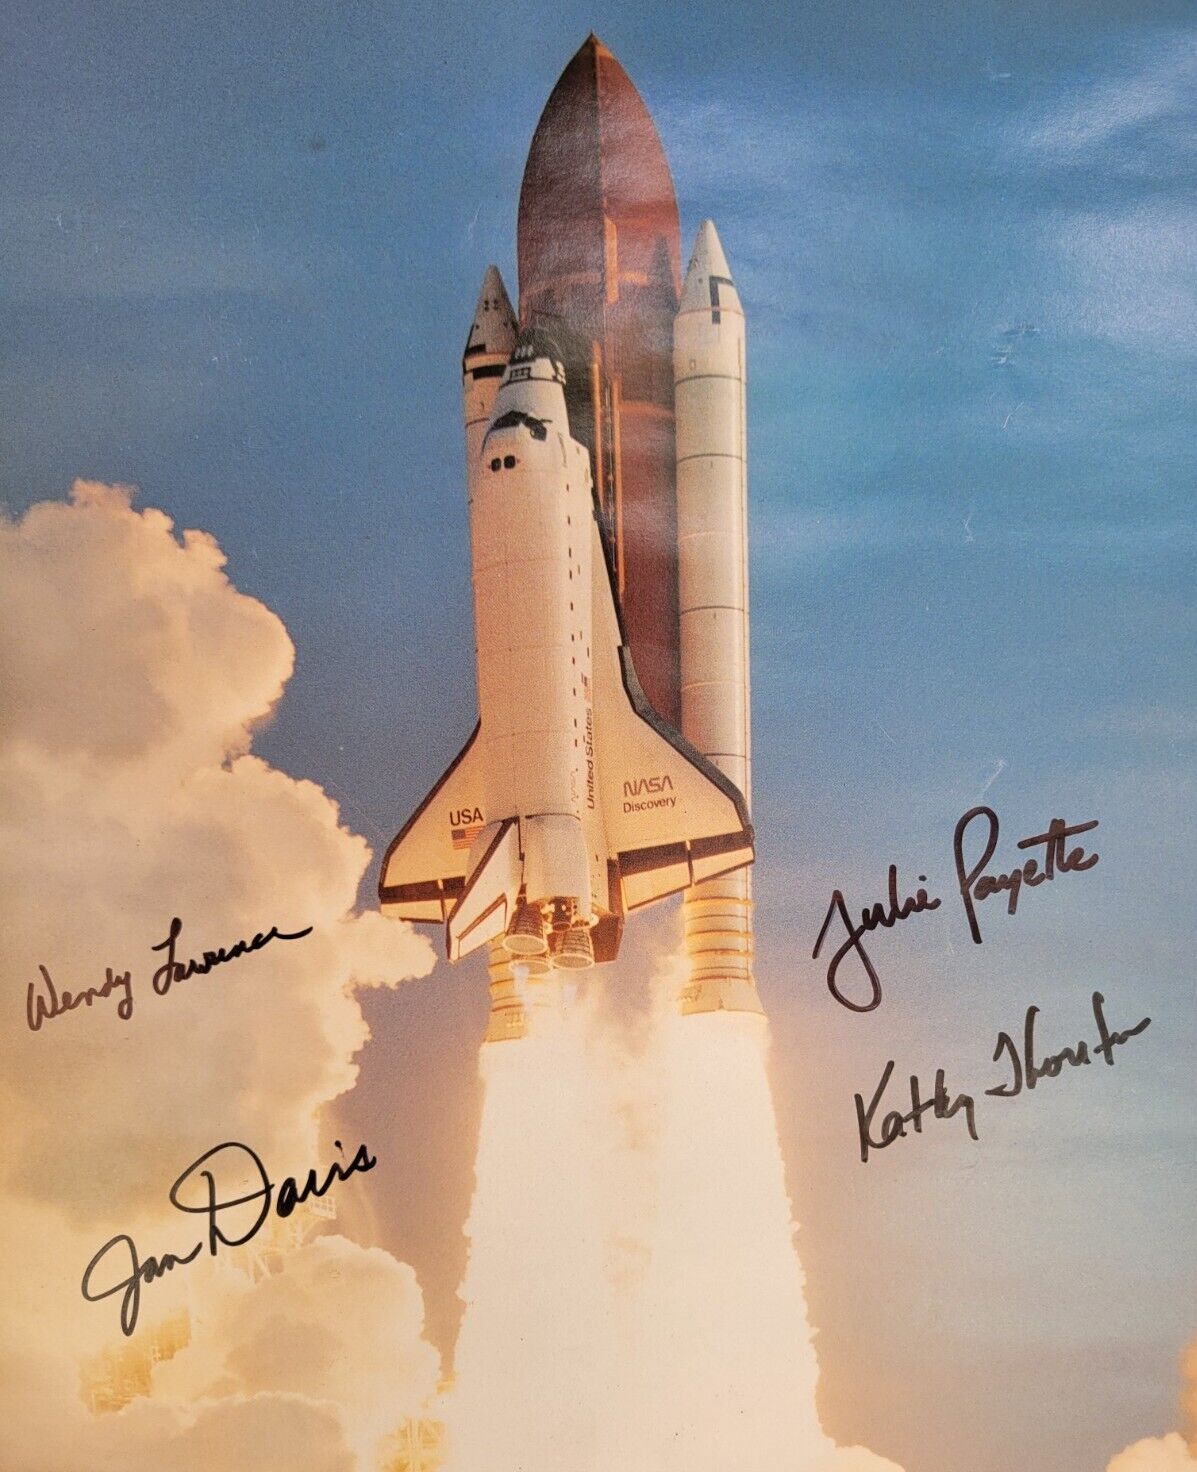 WOMEN ASTRONAUTS of DISCOVERY Lawrence Thornton Davis Payette SIGNED NASA POSTER